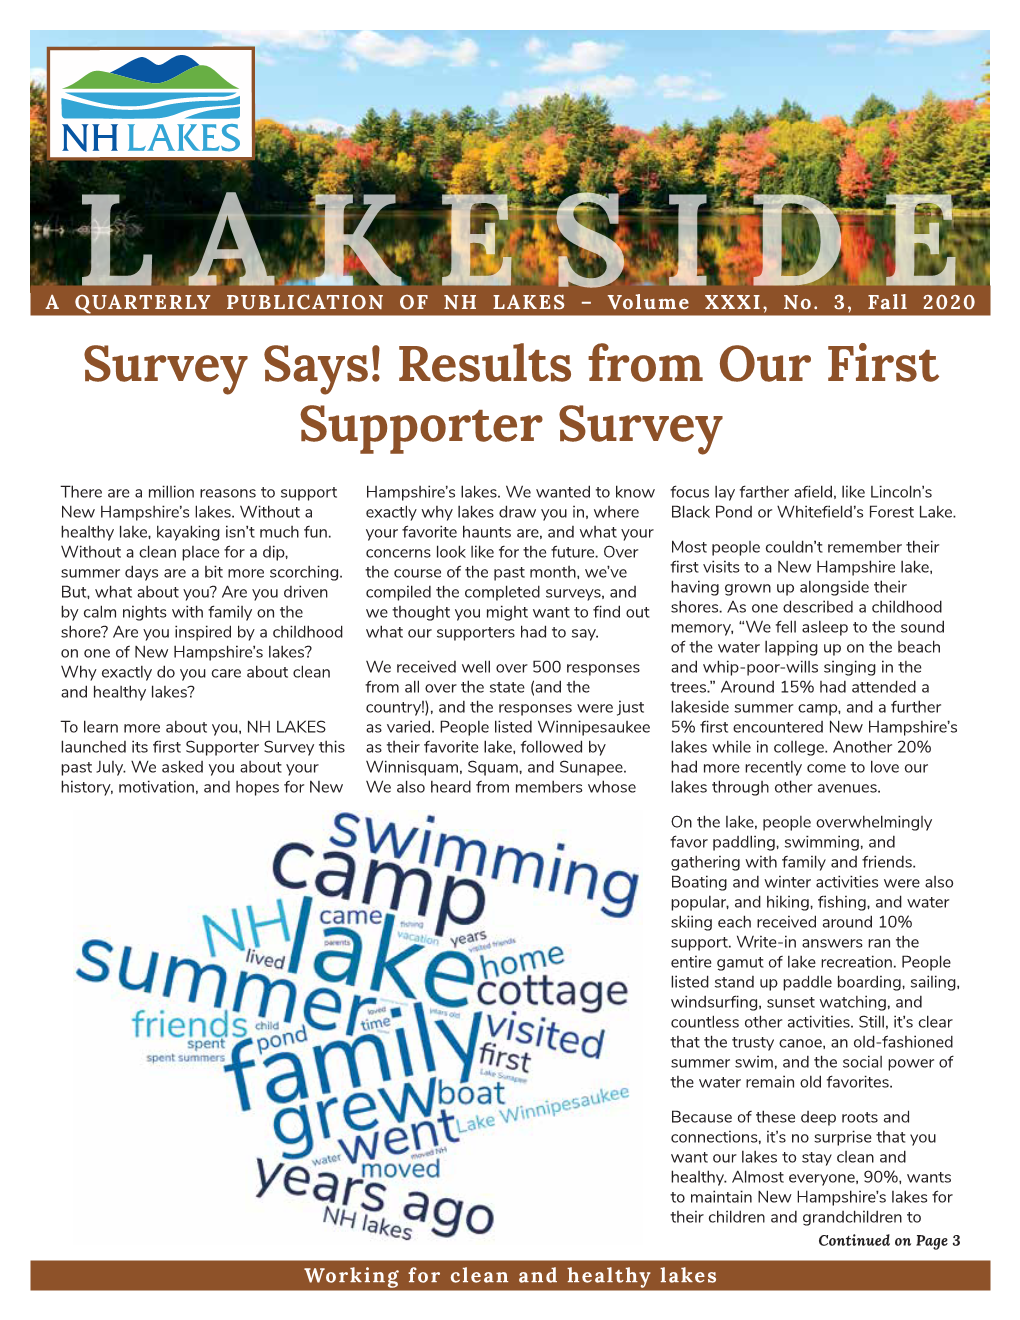 Survey Says! Results from Our First Supporter Survey